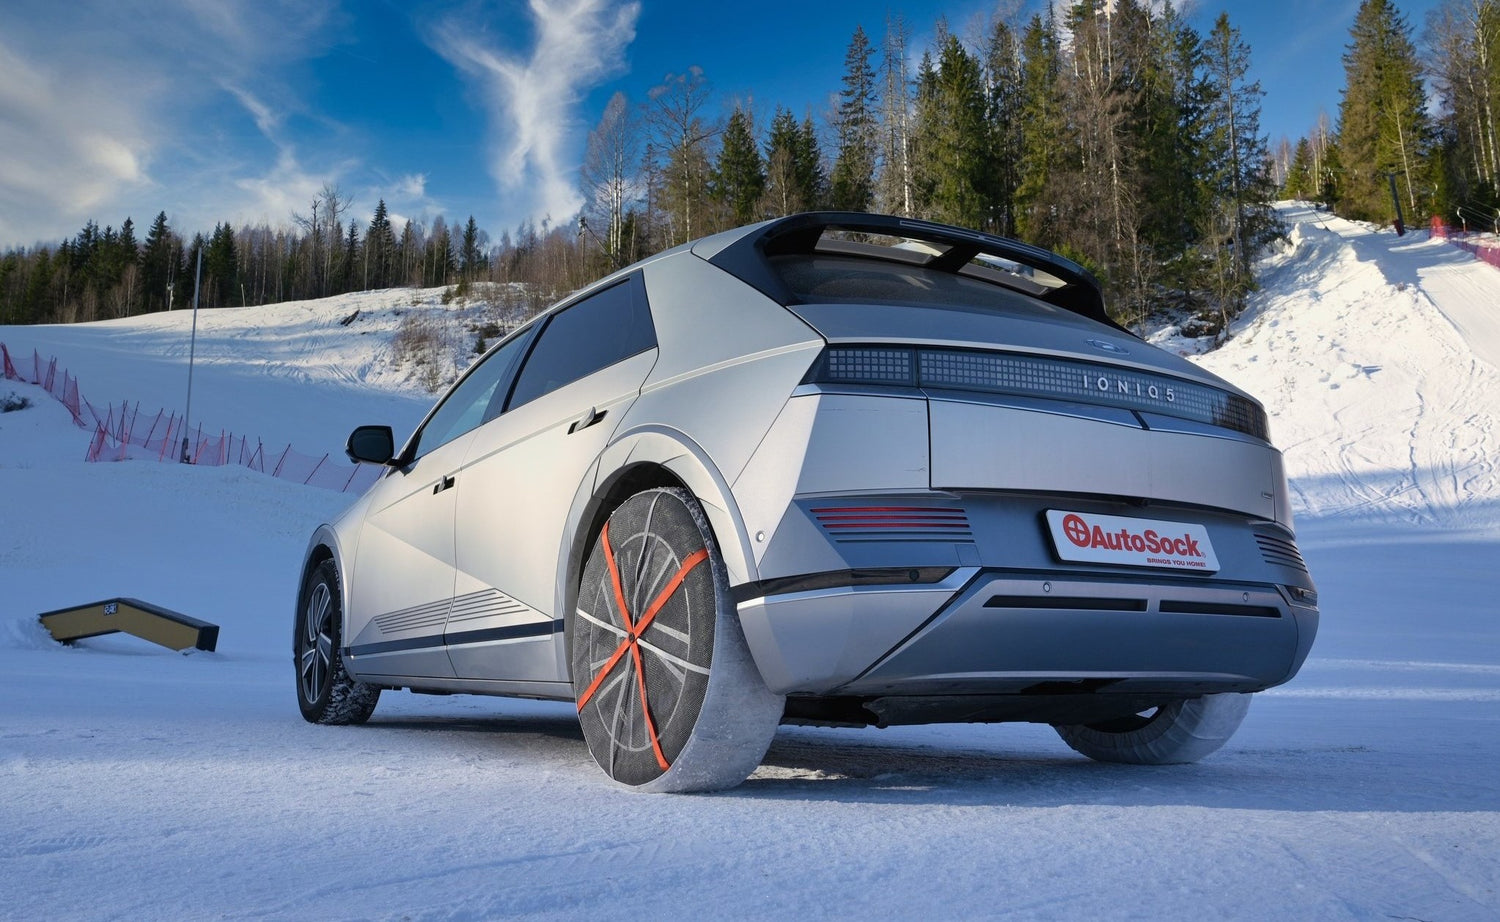 AutoSock mounted on rear wheels of a car, standing on snow in winter nature